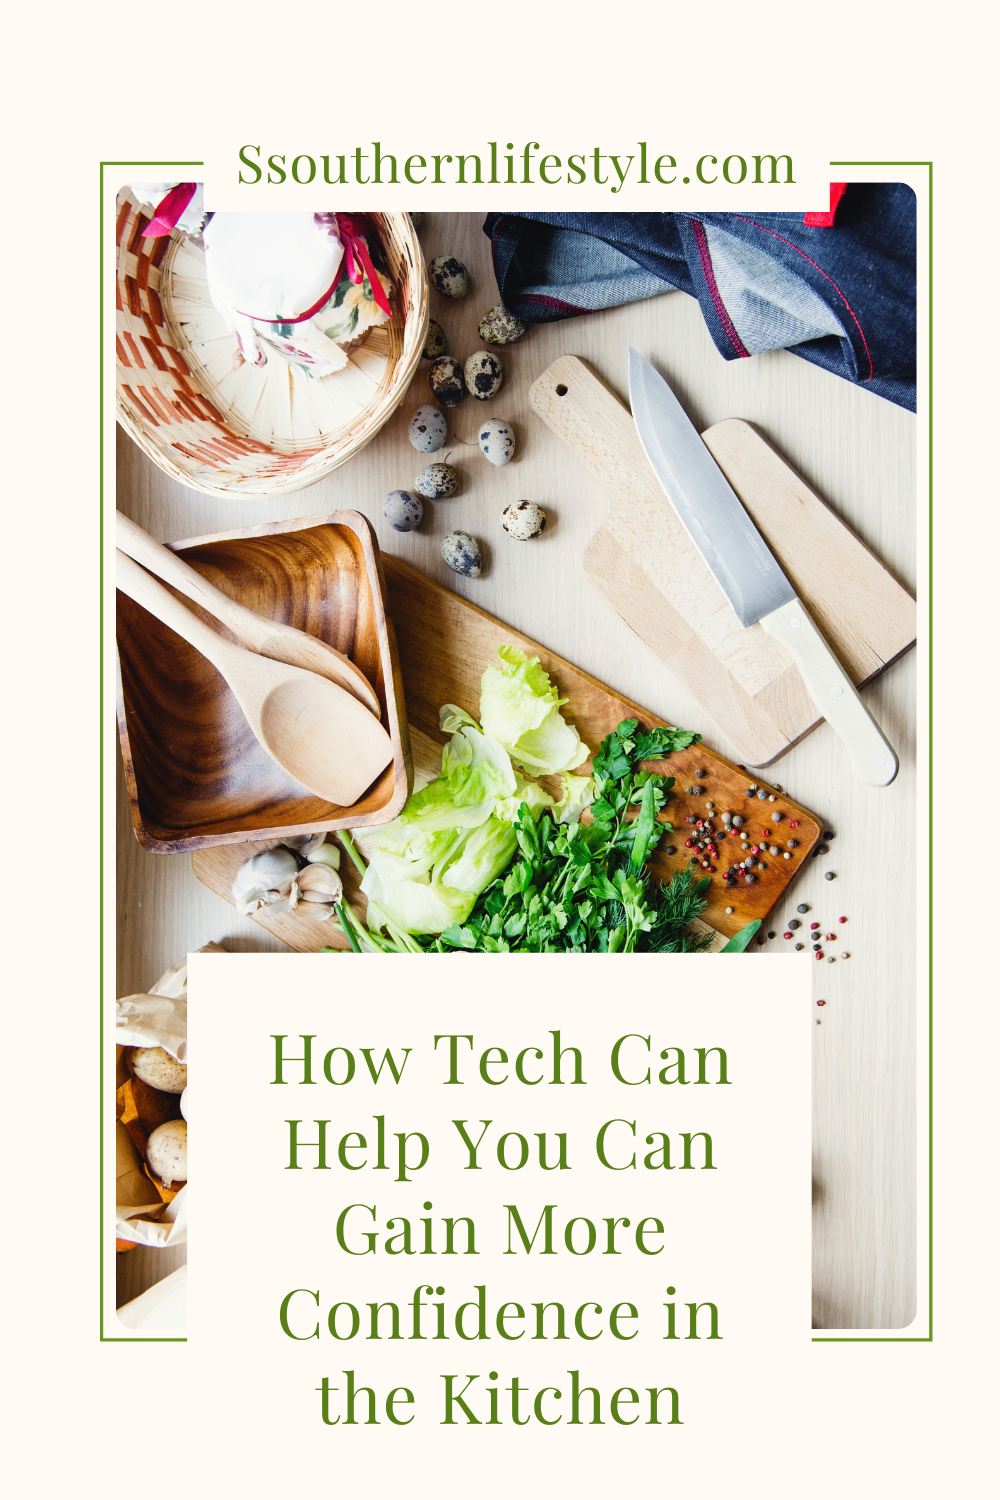 how technology helps in the kitchen learning to cook helping new cooks recipe creation internet cooking resources for cooking